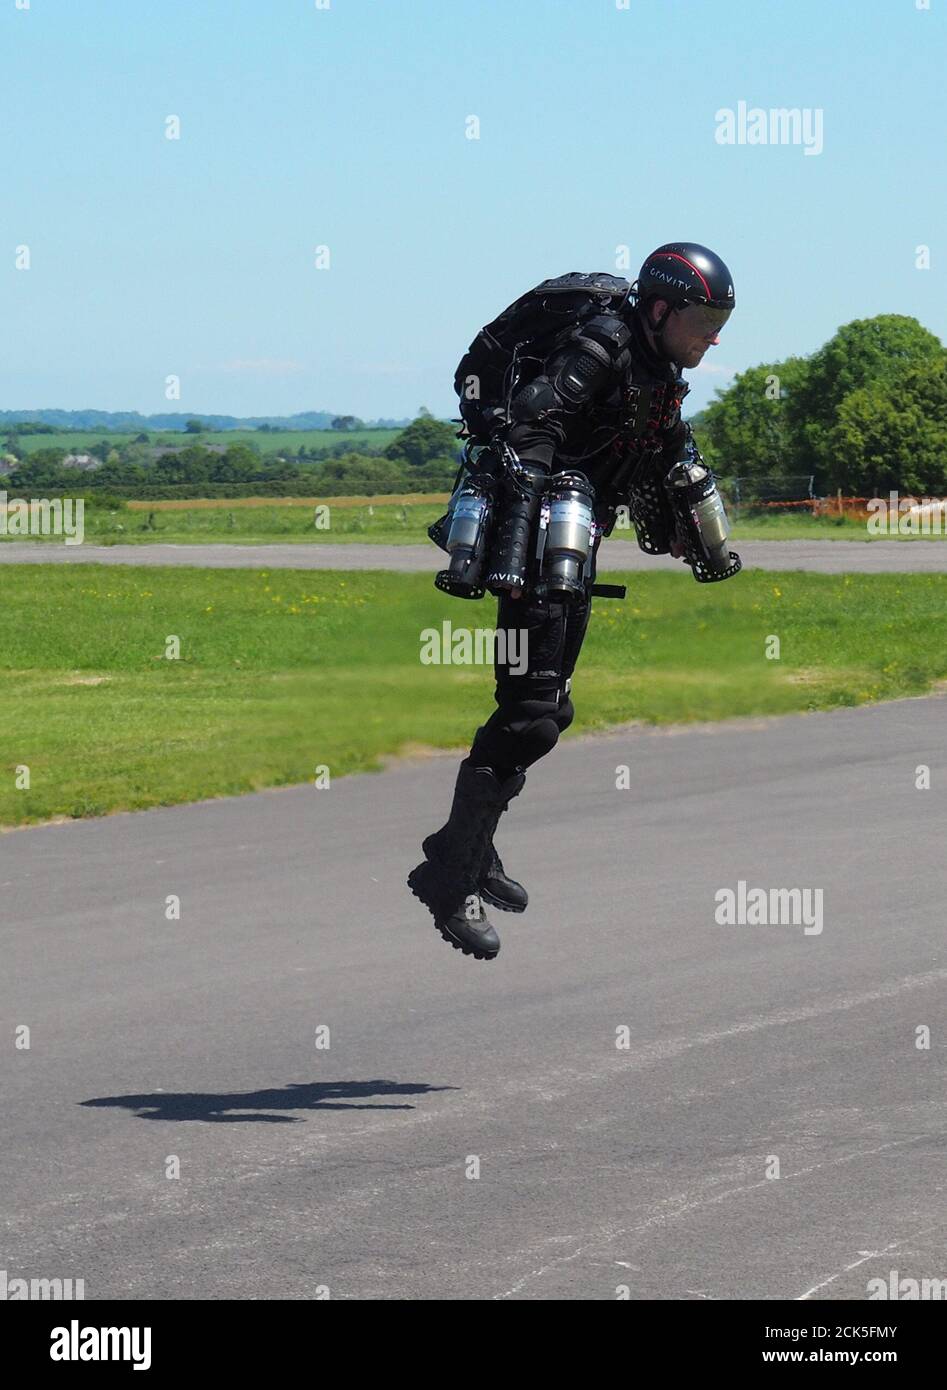 Inventor Richard Browning of technology startup Gravity flies in his ÒDaedalusÓ jet suit at Henstridge airfield in Somerset, Britain, May 25, 2017. Picture taken May 25, 2017. REUTERS/Mark Hanrahan Stock Photo